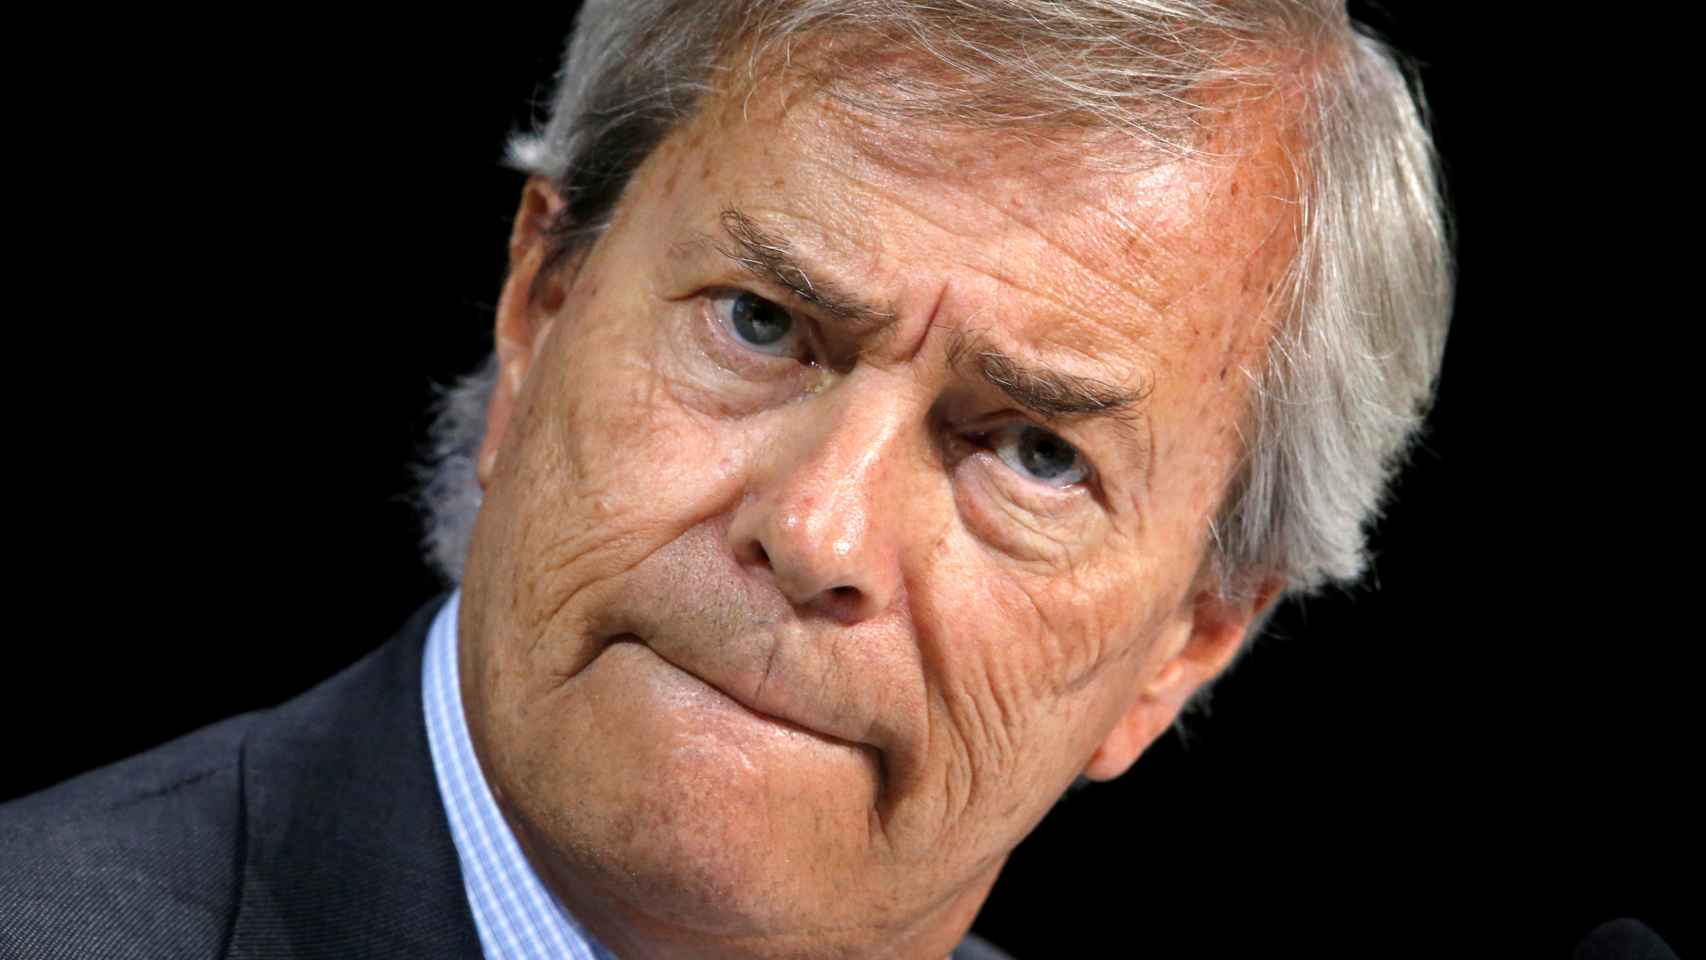 Vincent Bollore, Chairman of media group Vivendi, reacts during the company's shareholders meeting in Paris